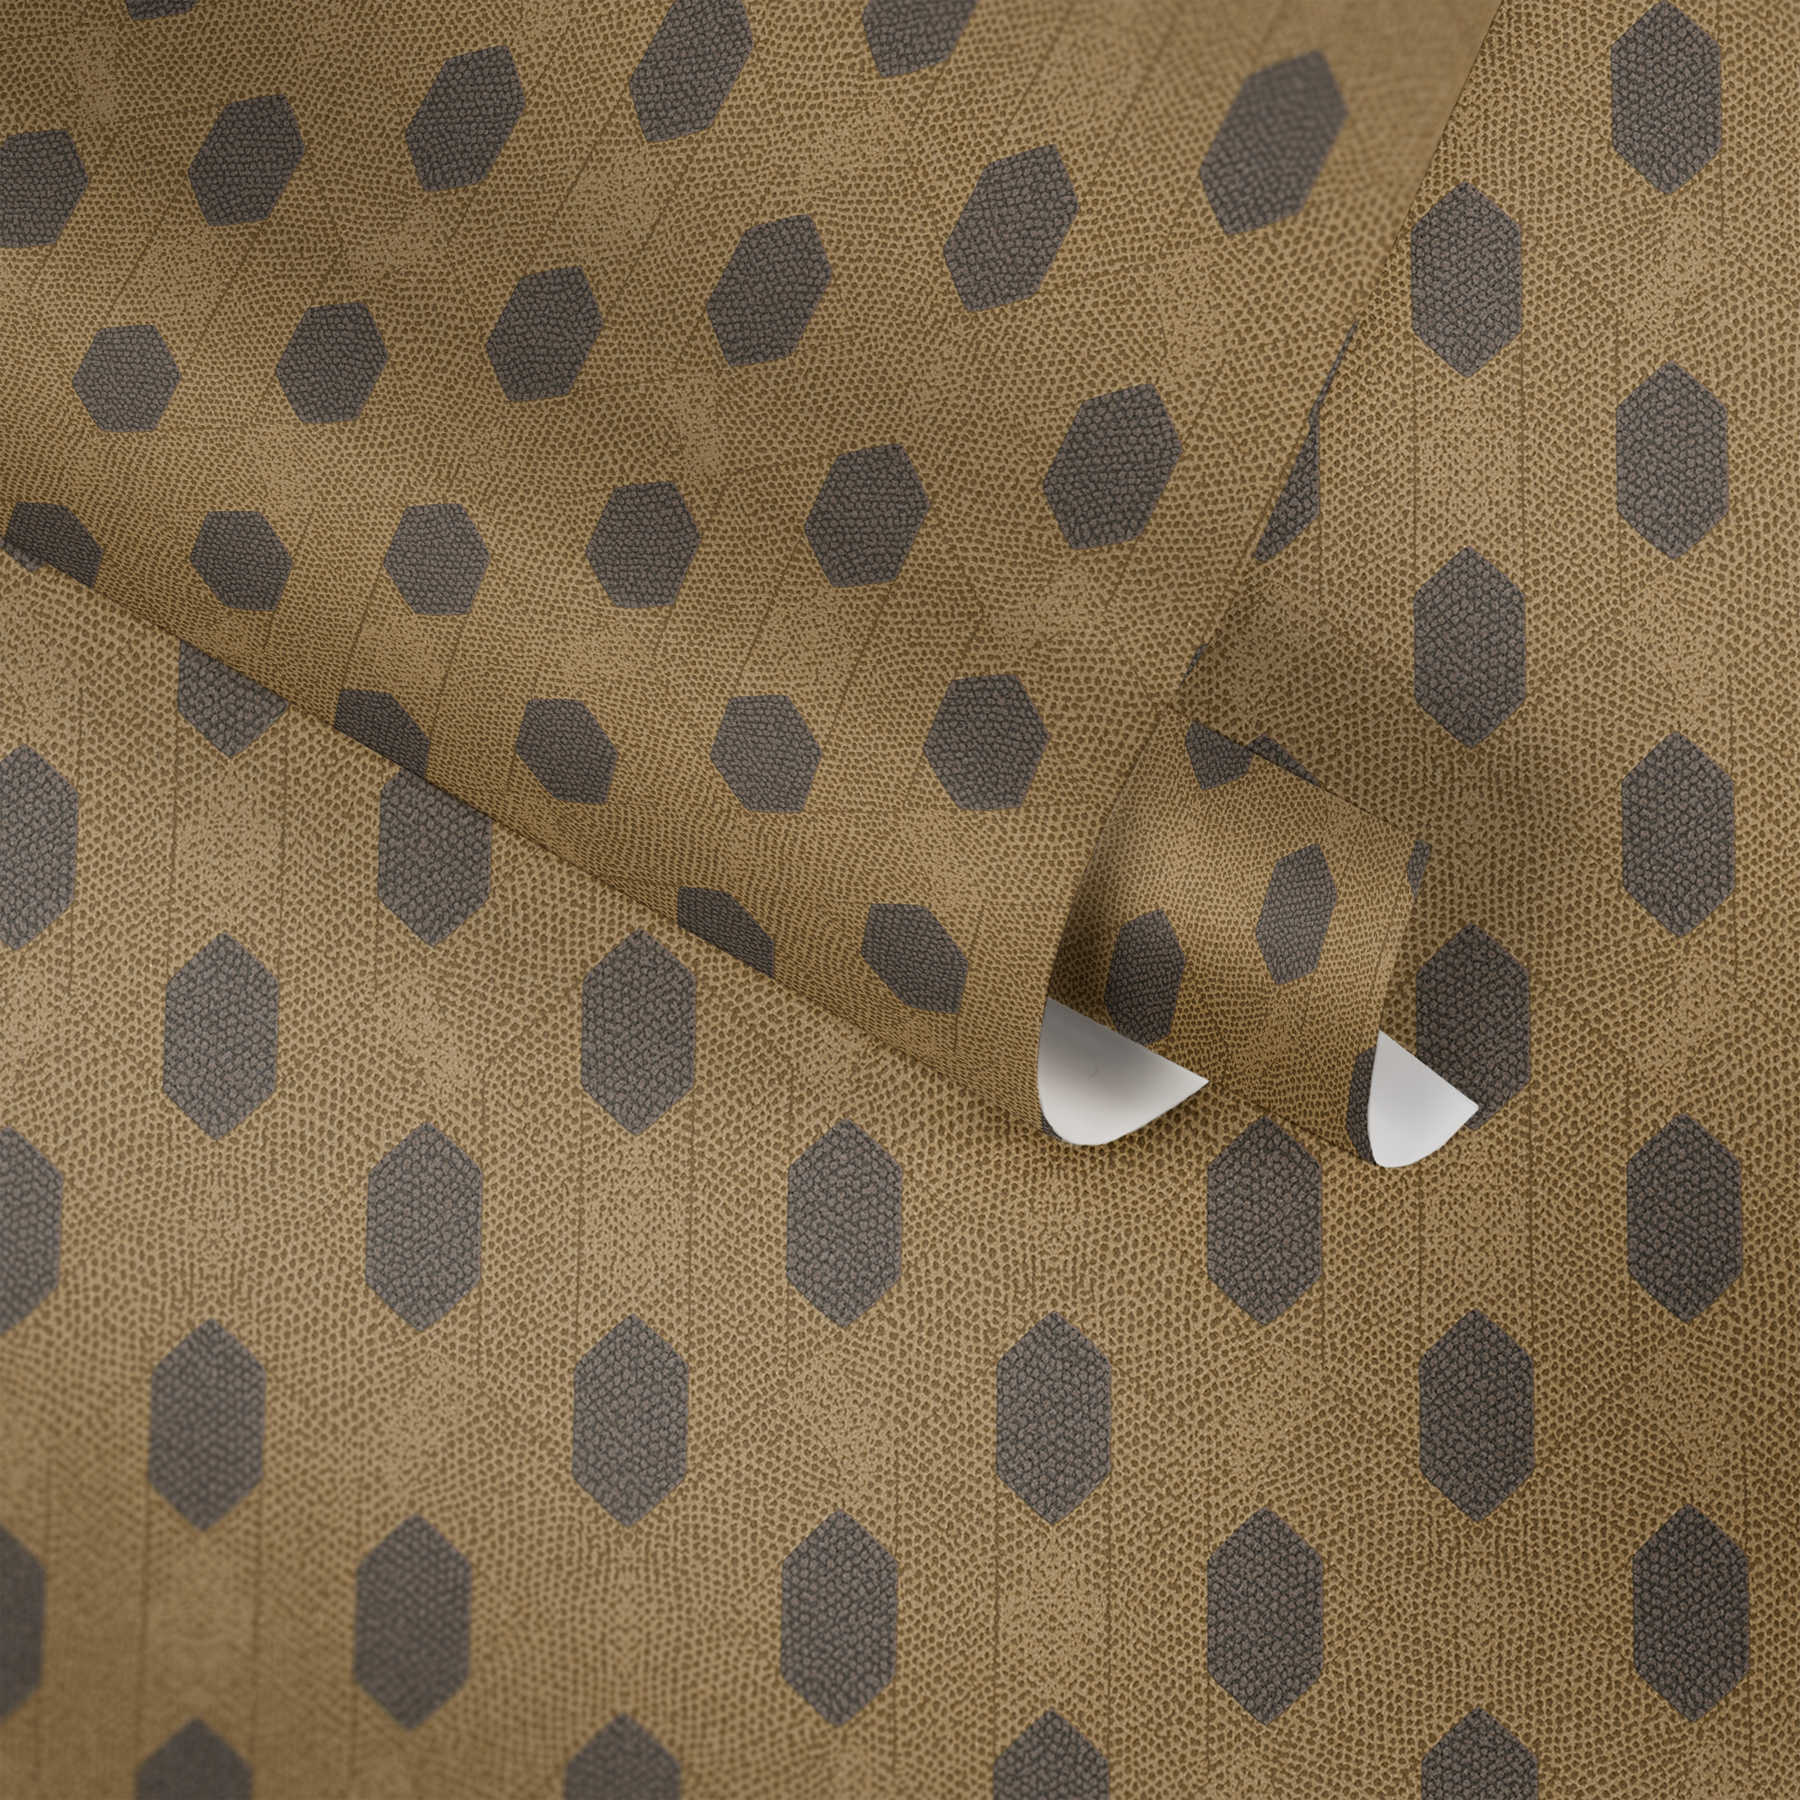             Non-woven wallpaper gold with geometric pattern - brown, gold, black
        